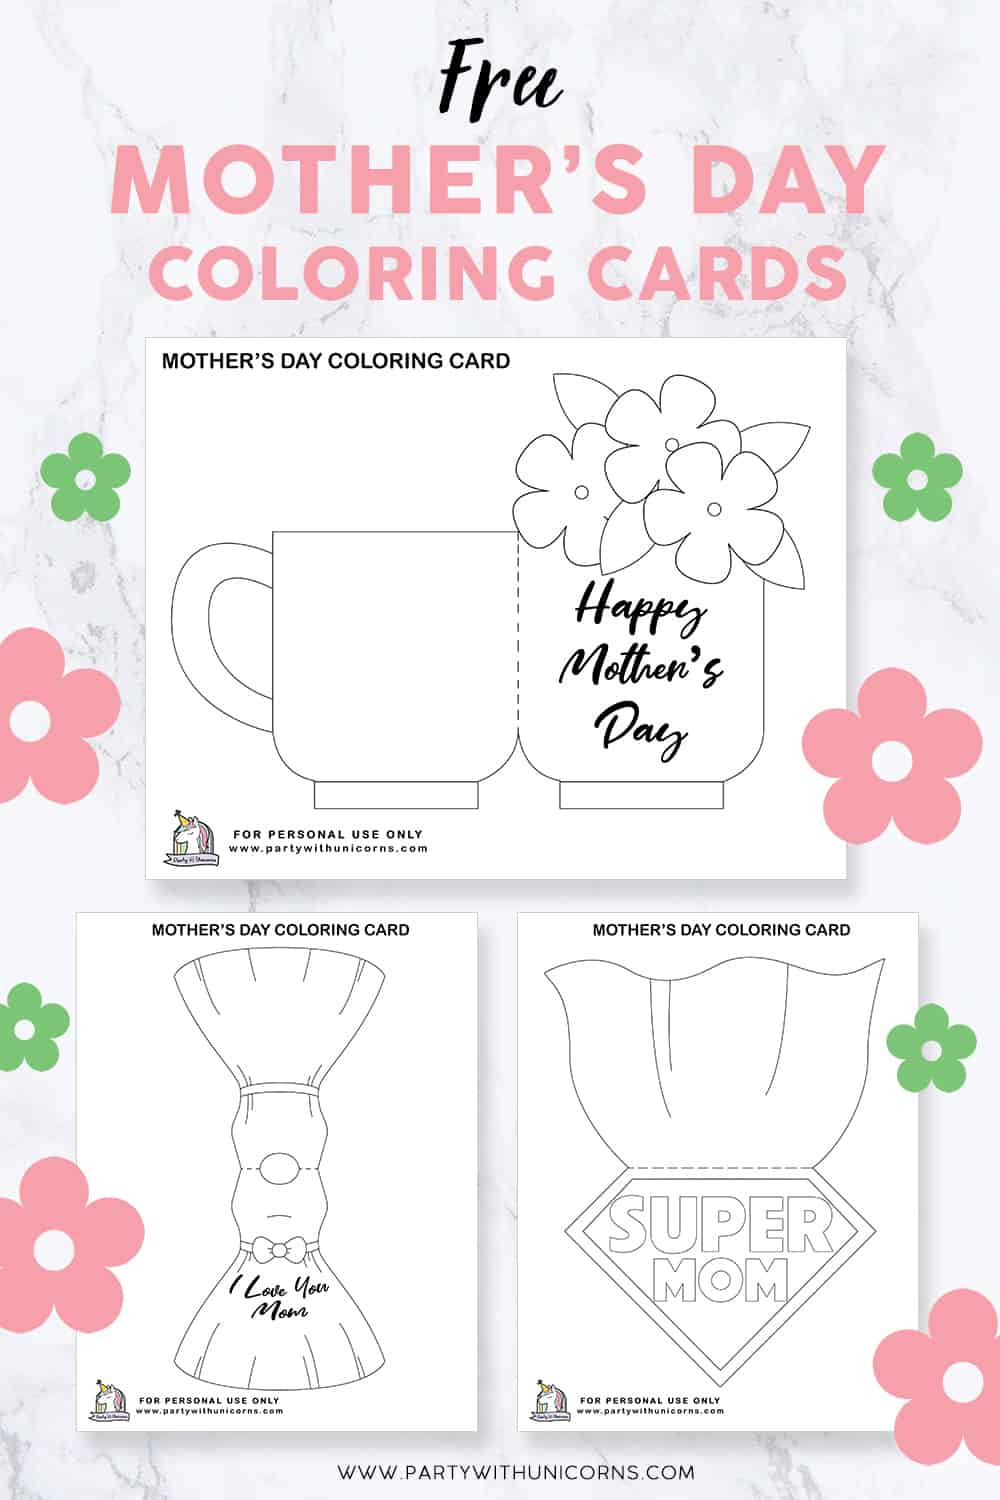 Free Mother's Day Coloring Cards image